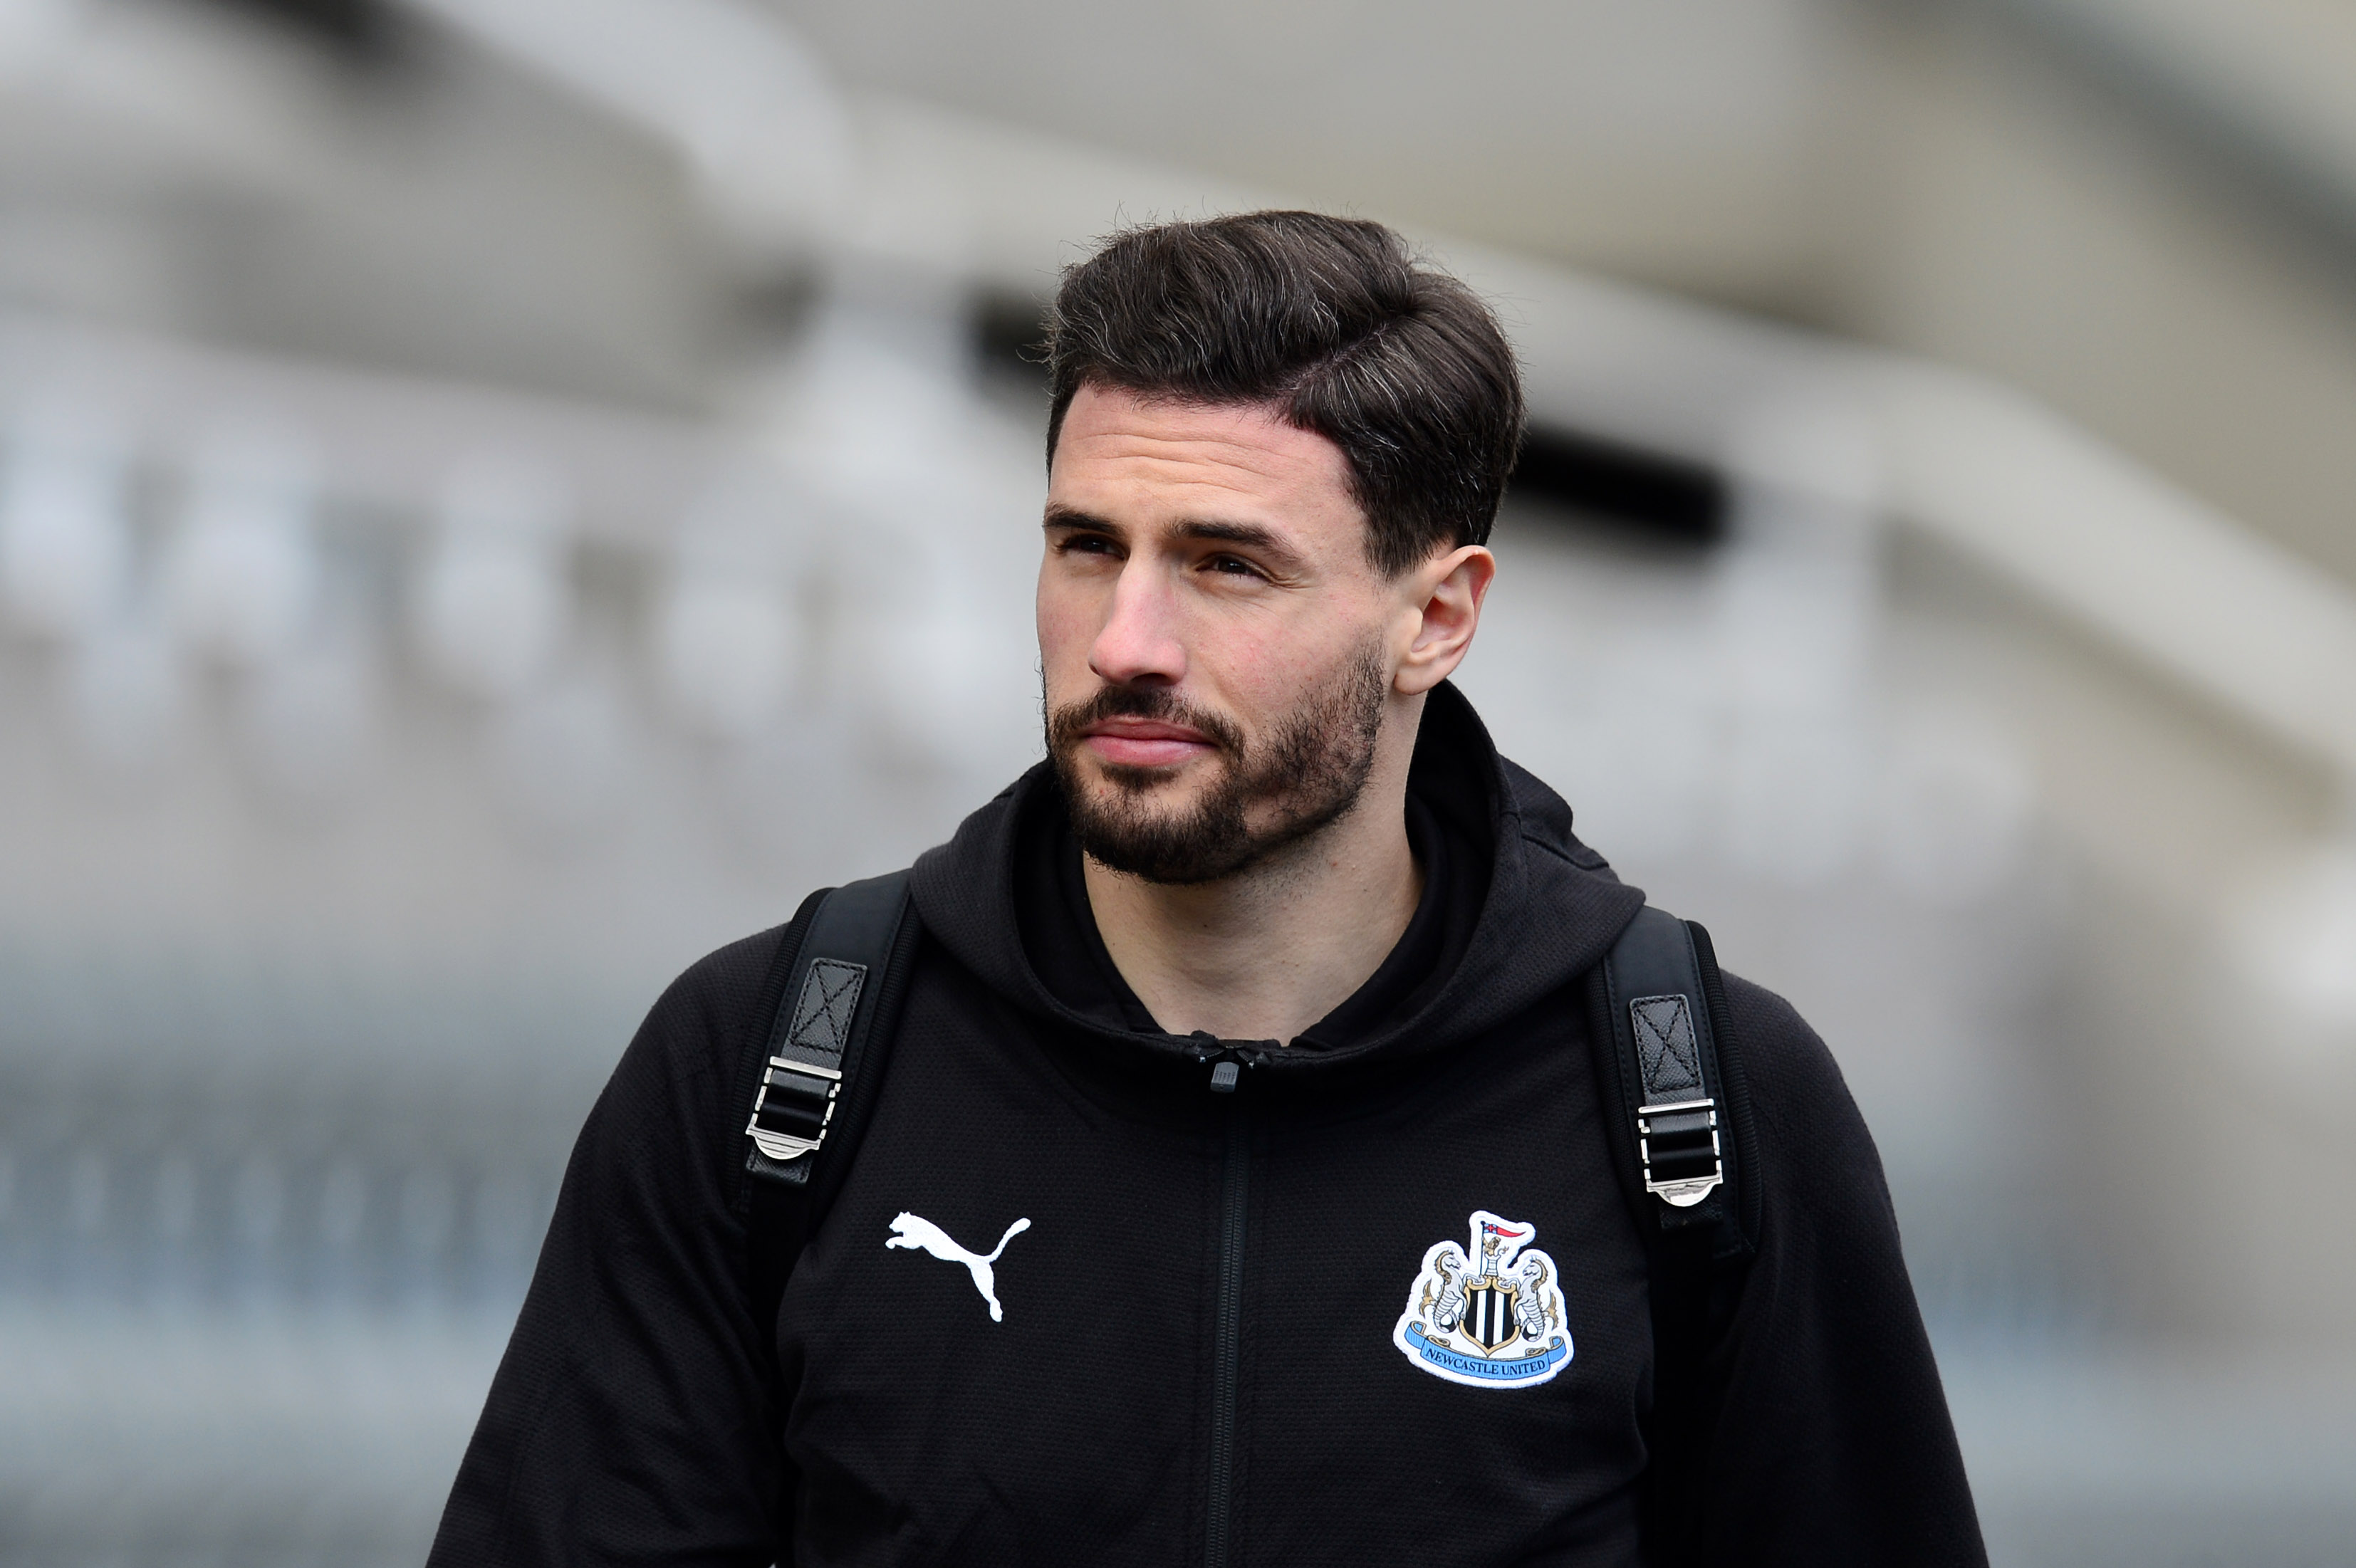 NEWCASTLE UPON TYNE, ENGLAND - MARCH 09: Fabian Schar of Newcastle Uniated arrives at the stadium prior to the Premier League match between Newcastle United and Everton FC at St. James Park on March 09, 2019 in Newcastle upon Tyne, United Kingdom. (Photo by Mark Runnacles/Getty Images)